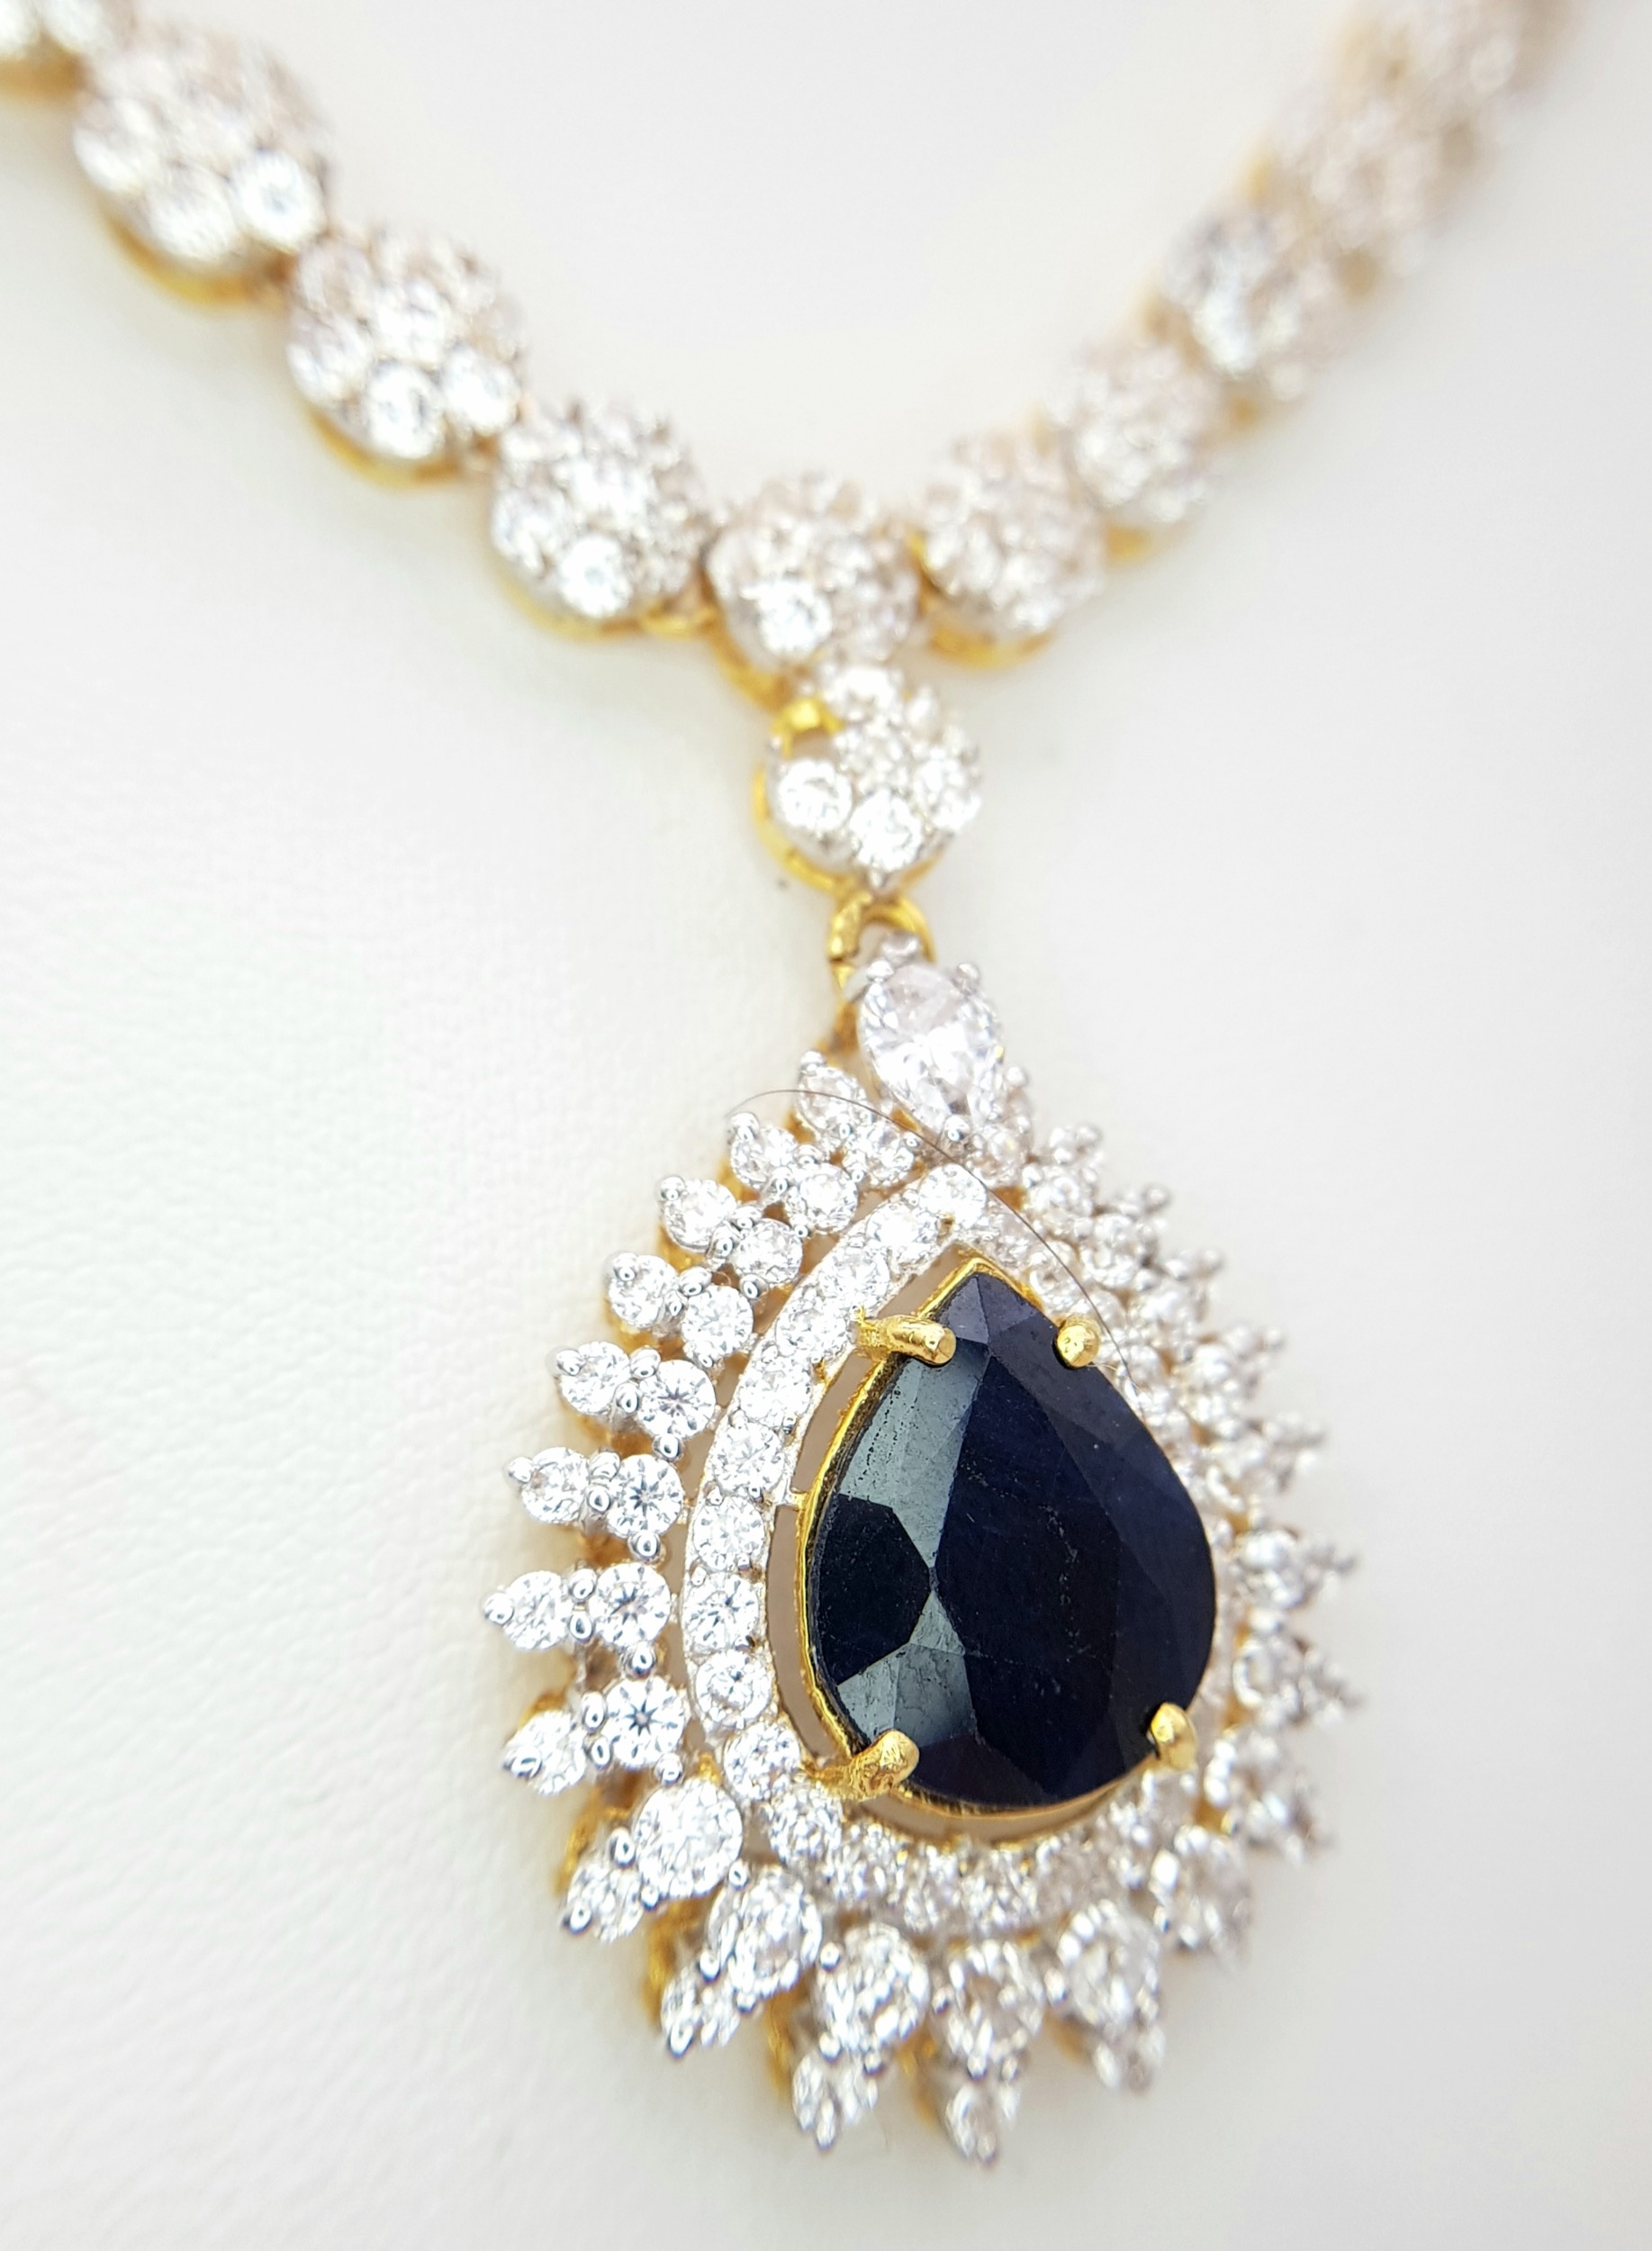 A Fabulous Jewellery Lot! A 21K Rich Yellow Gold Diamond and White Stone (one missing) Necklace with - Image 3 of 8